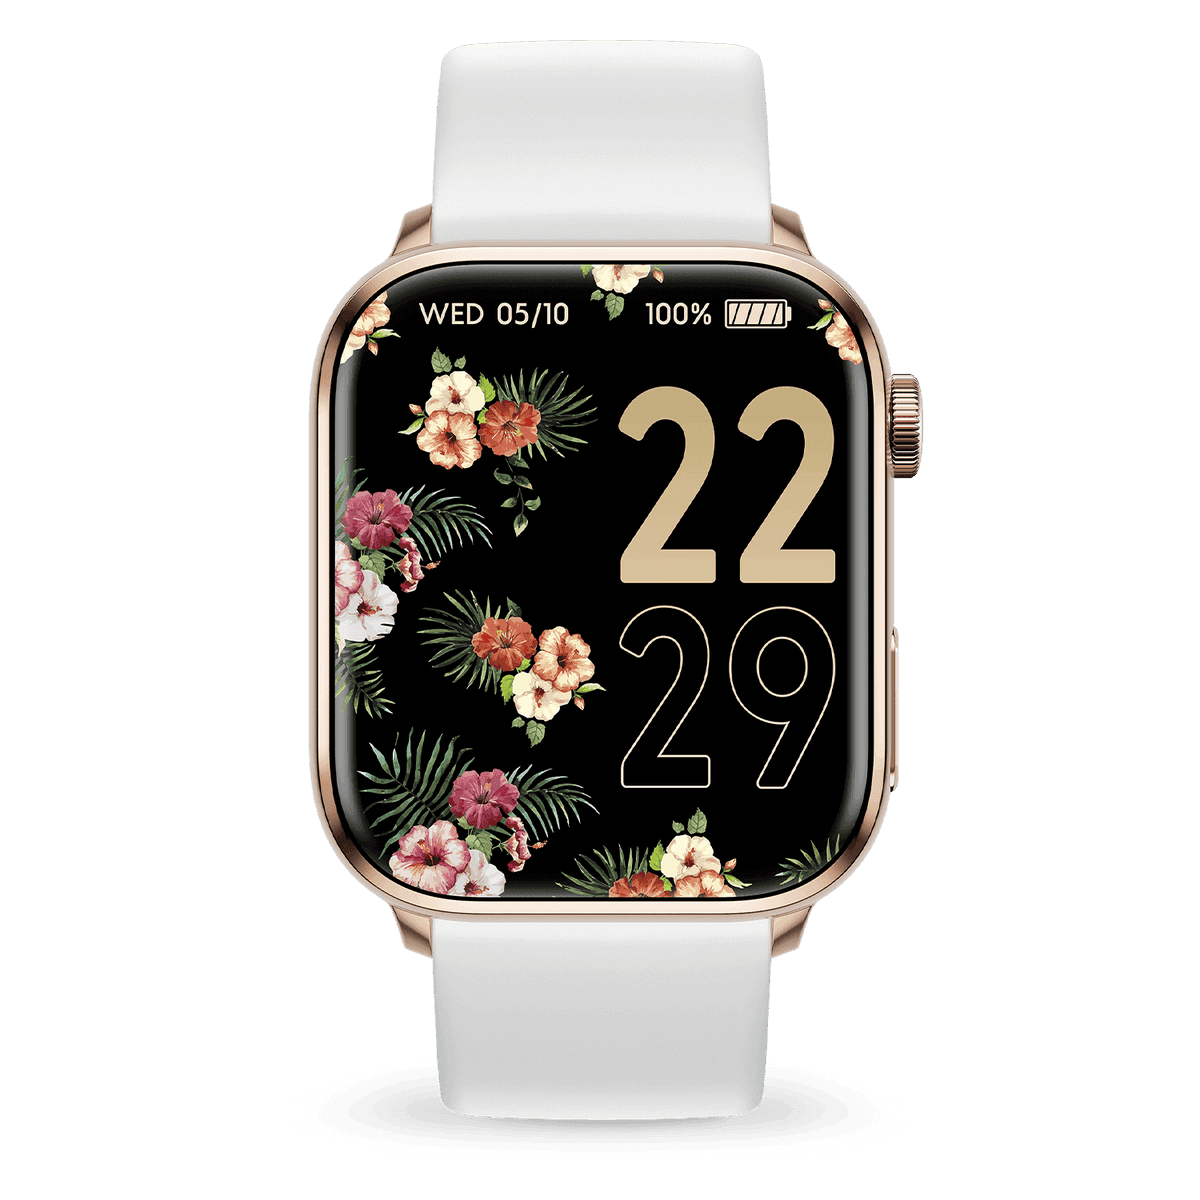 Ice Smart Two - 022537-ice-smart-two-rose-gold-white-01_a2119ce7-83b6-47e8-8dfb-a2cf16c47500